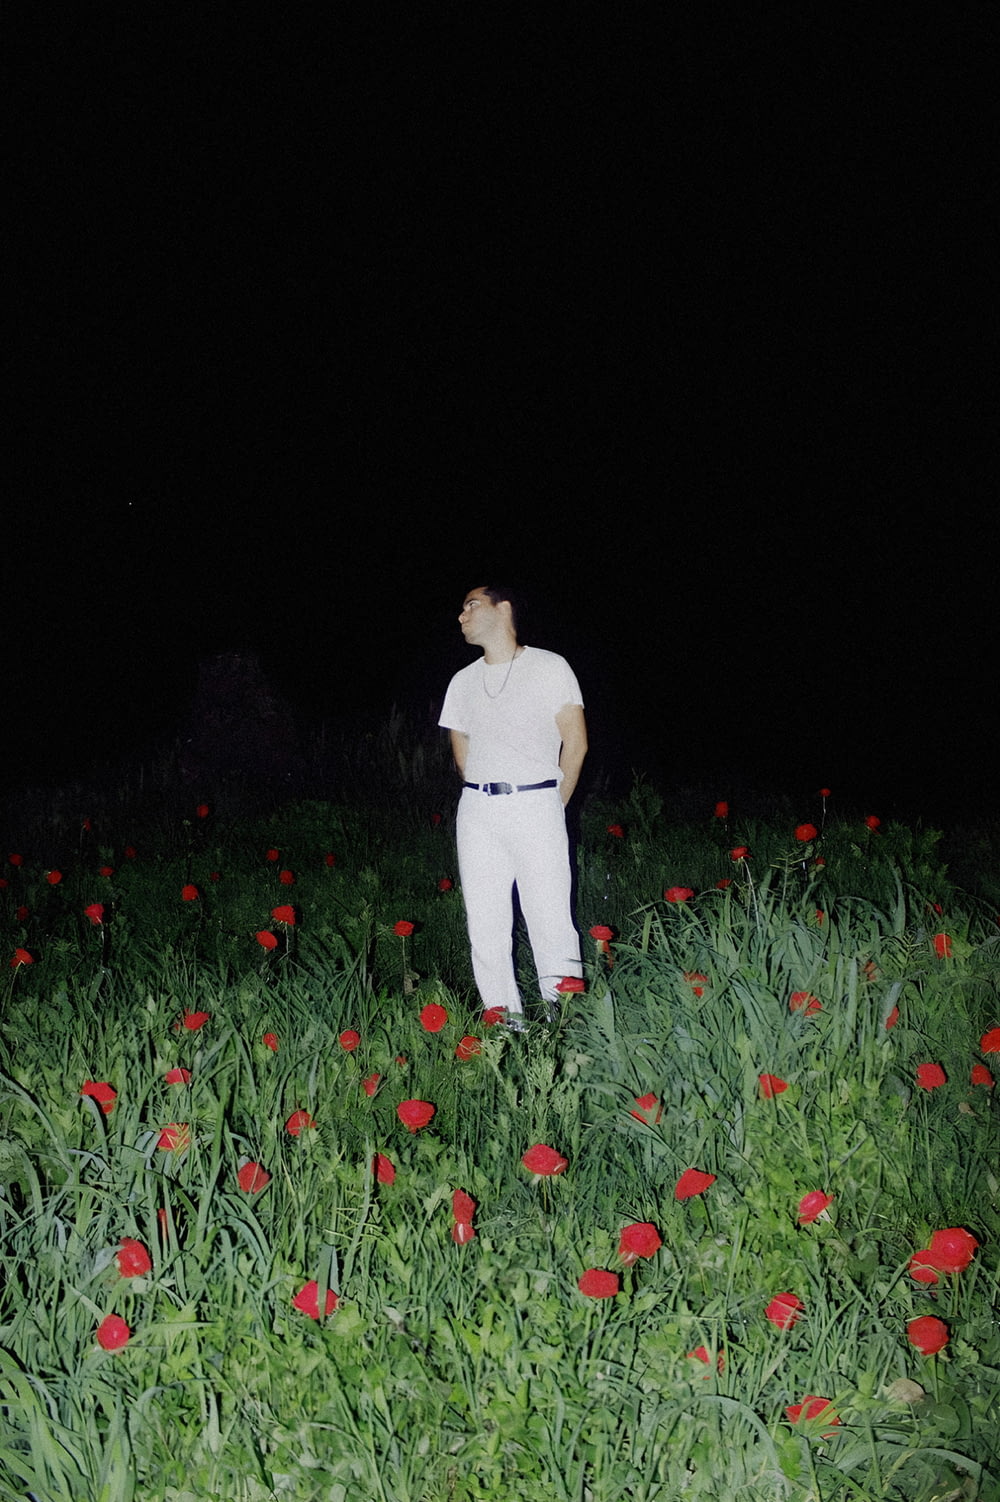 a man standing in a field of flowers at night